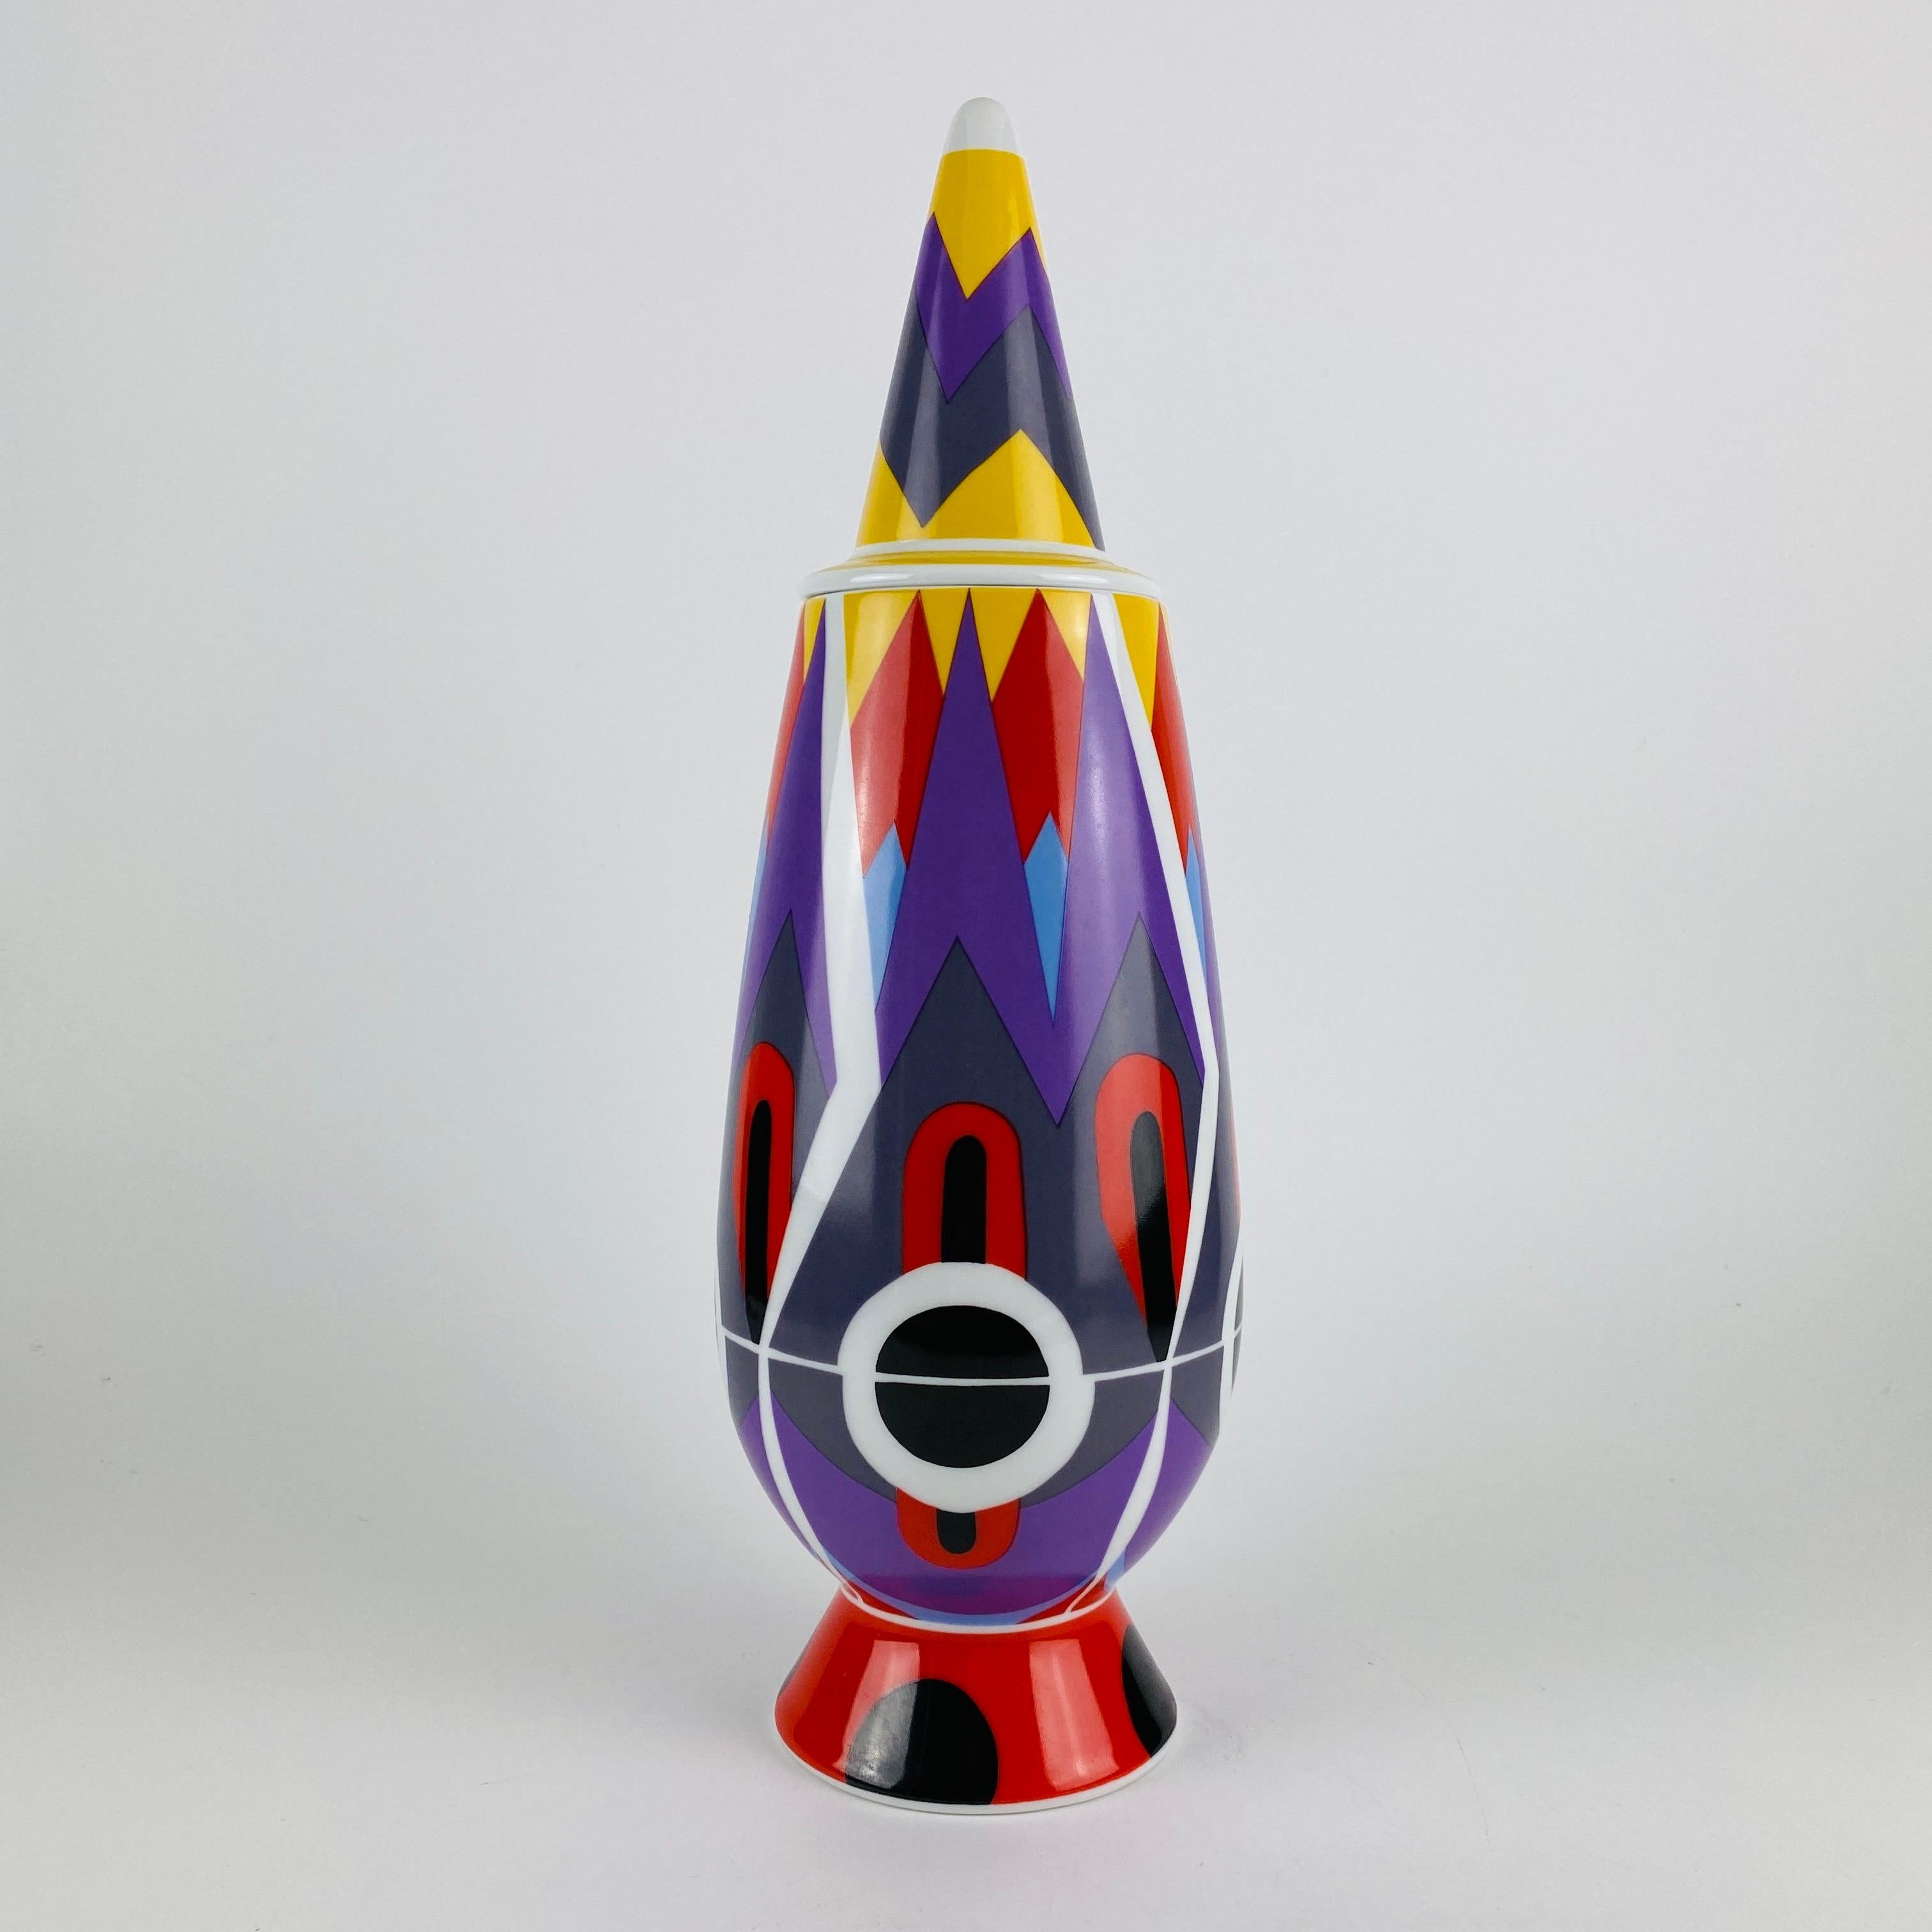 This Tendentse Alessi vase with lid is part of the 100% make-up limited series of a 100 reproductions. This series consists of 100 different vases and 100 different designers/decorators. 

This vase in particular is designed by Alessandro Mendini